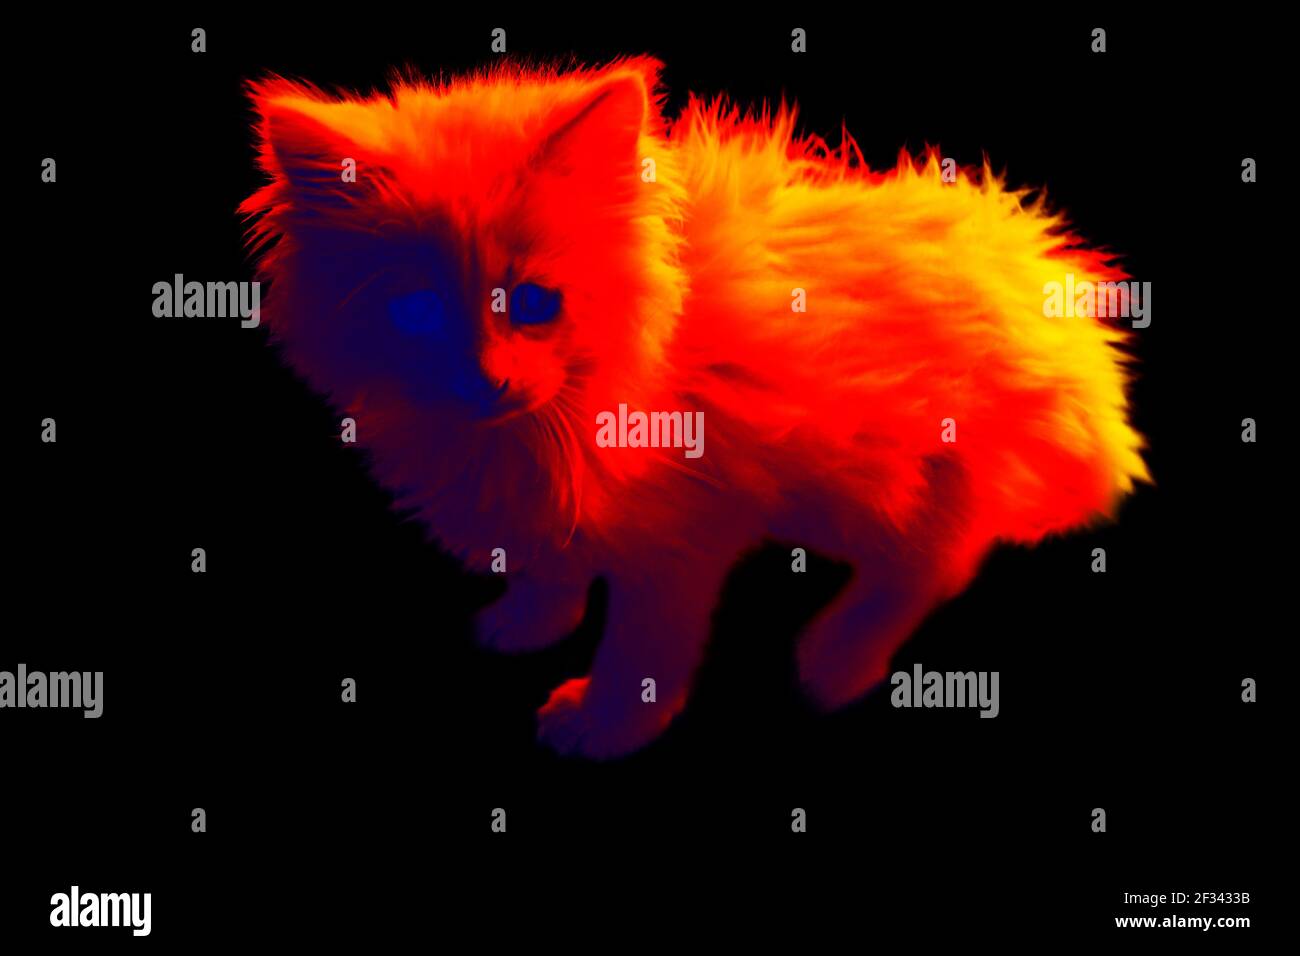 Little kitten. Scanning the animal's body temperature with a thermal imager Stock Photo